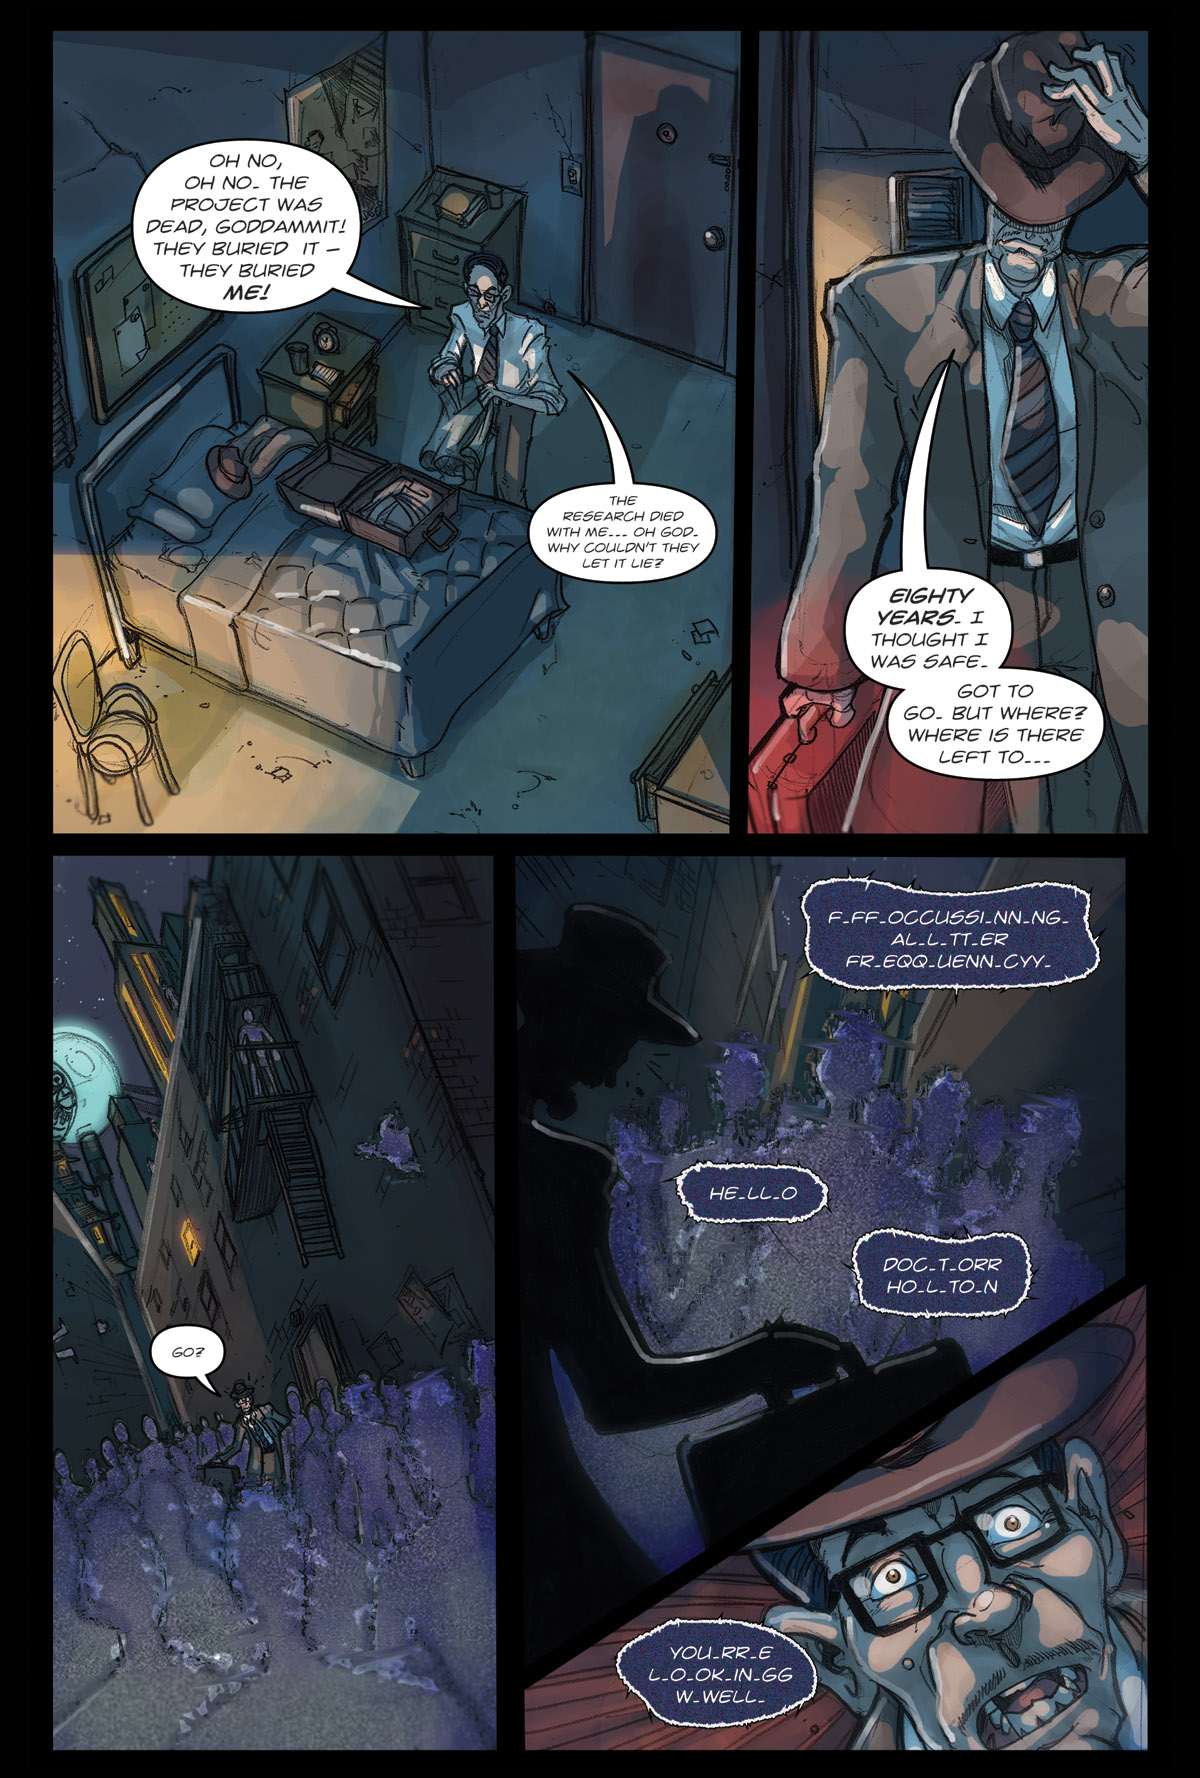 Afterlife Inc. | Near Life | Page 4